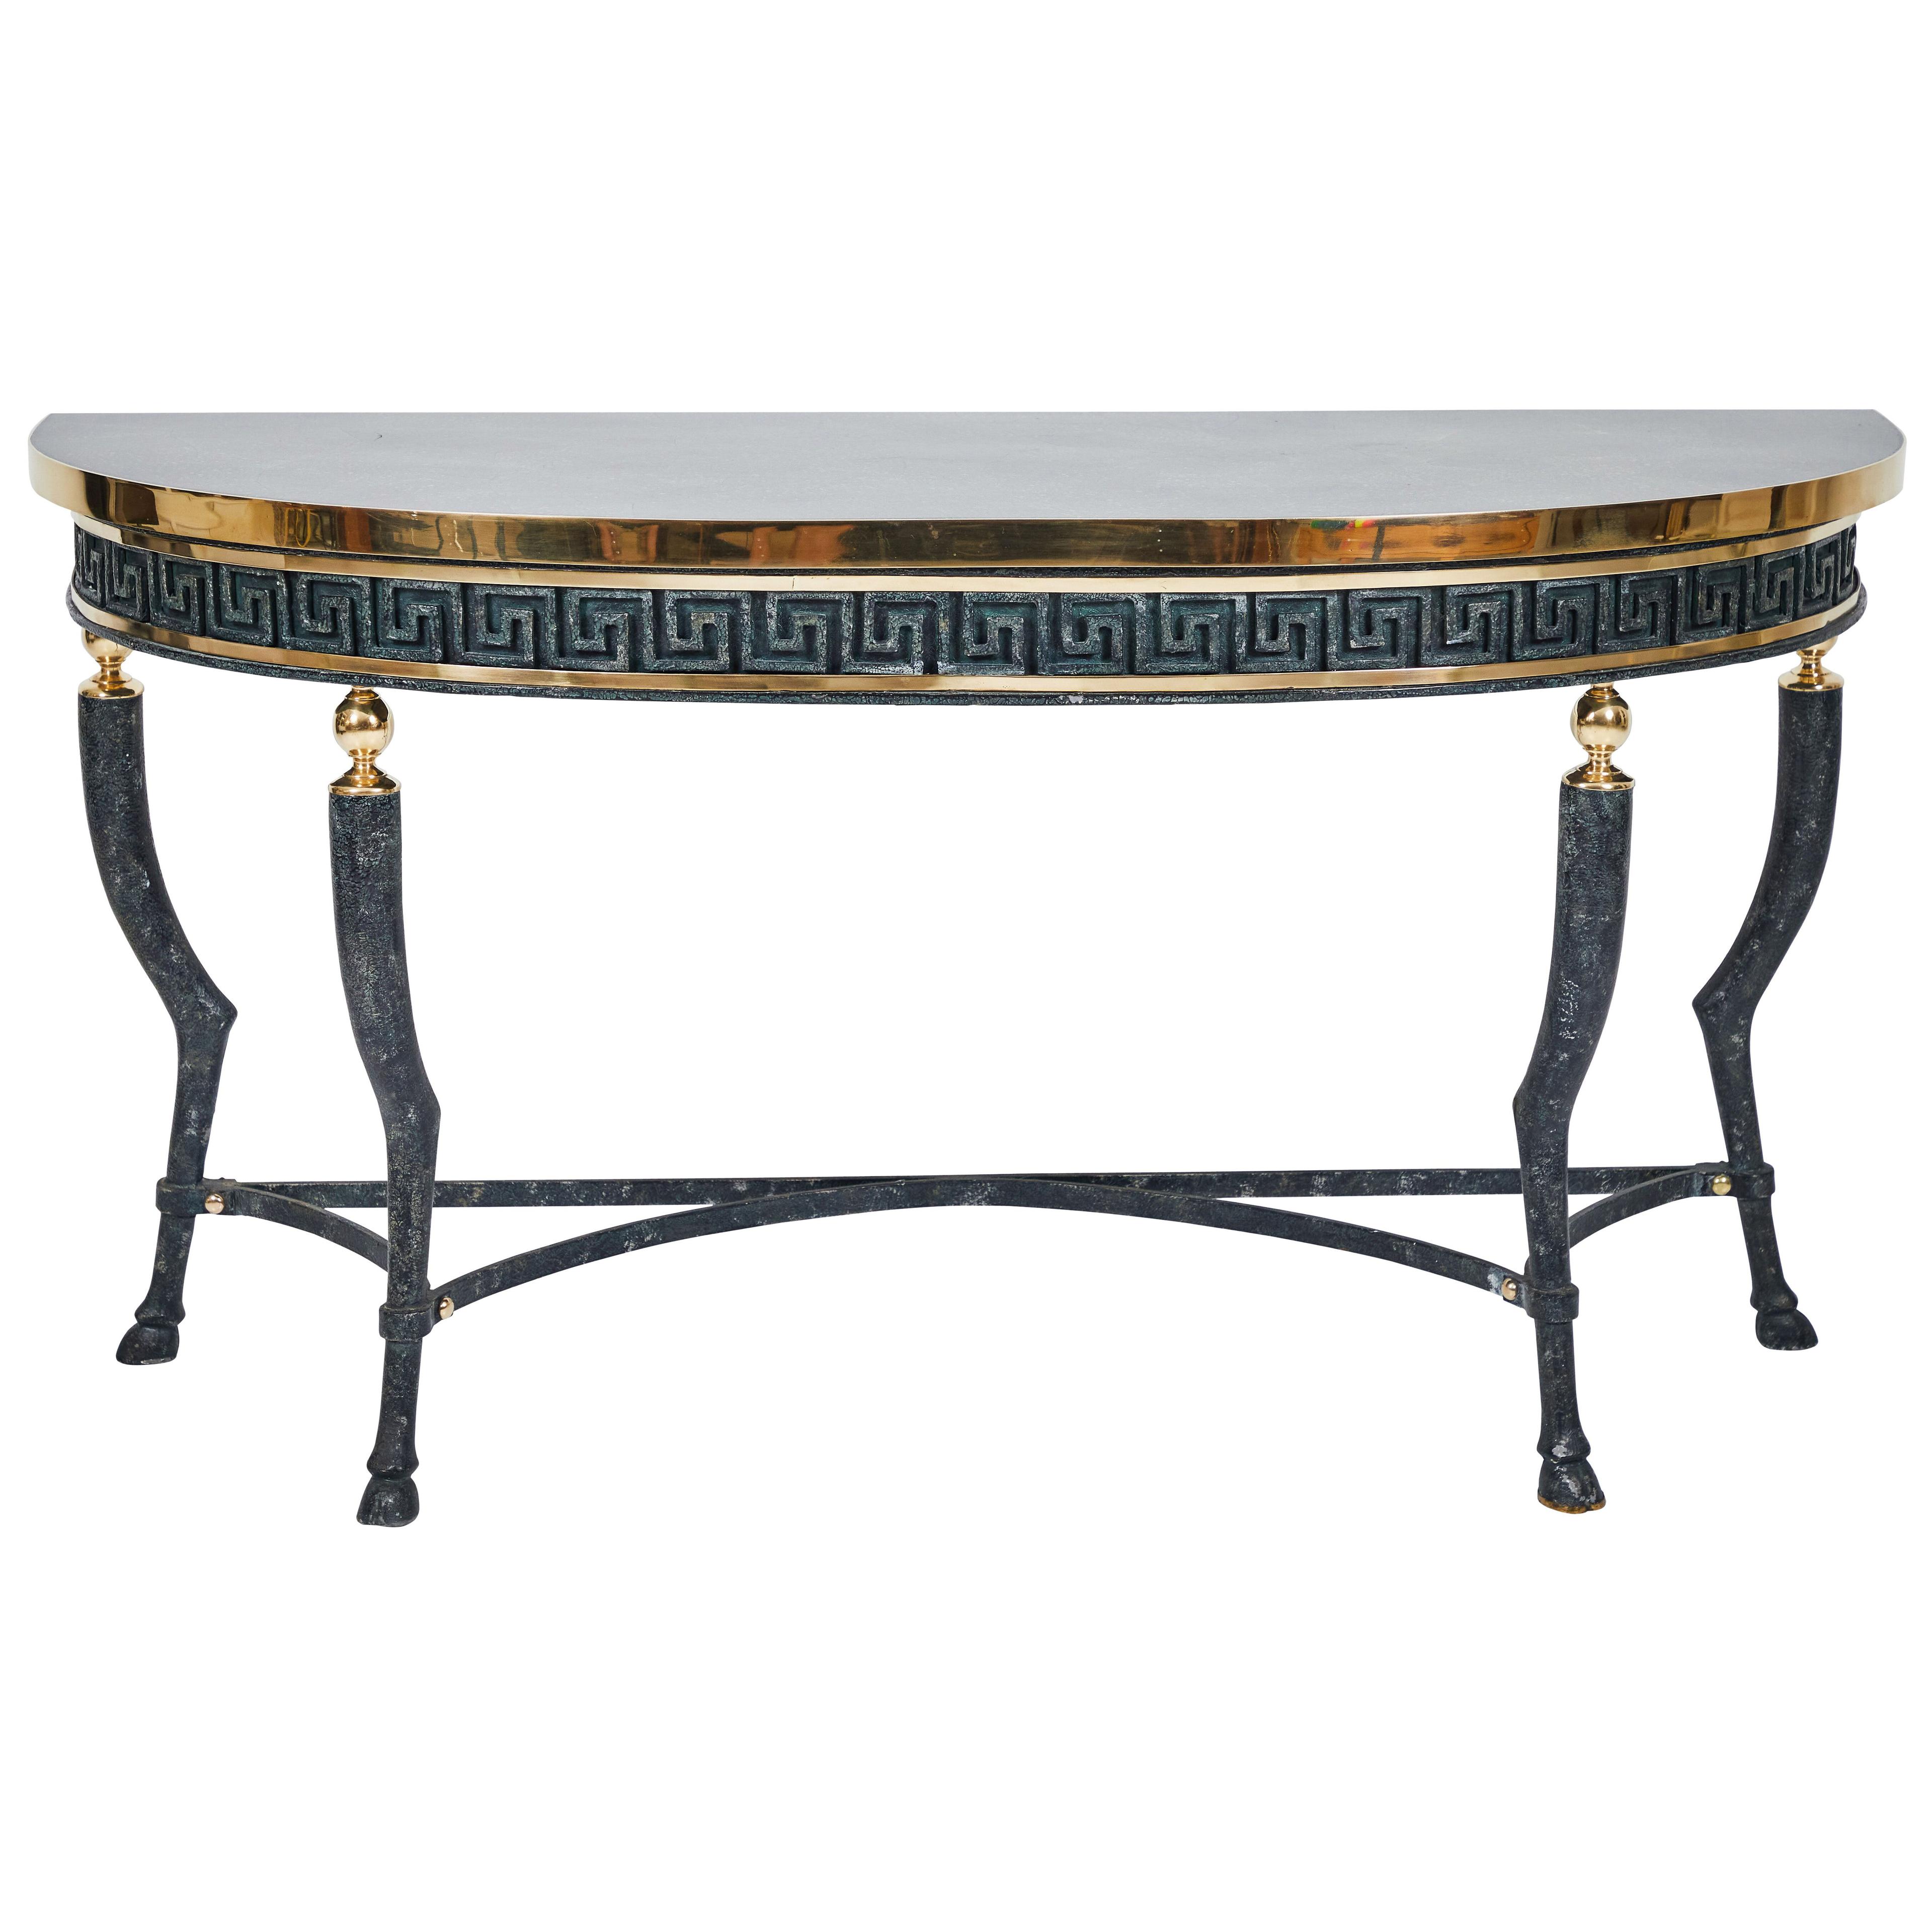 A Stone and Brass French Style Console